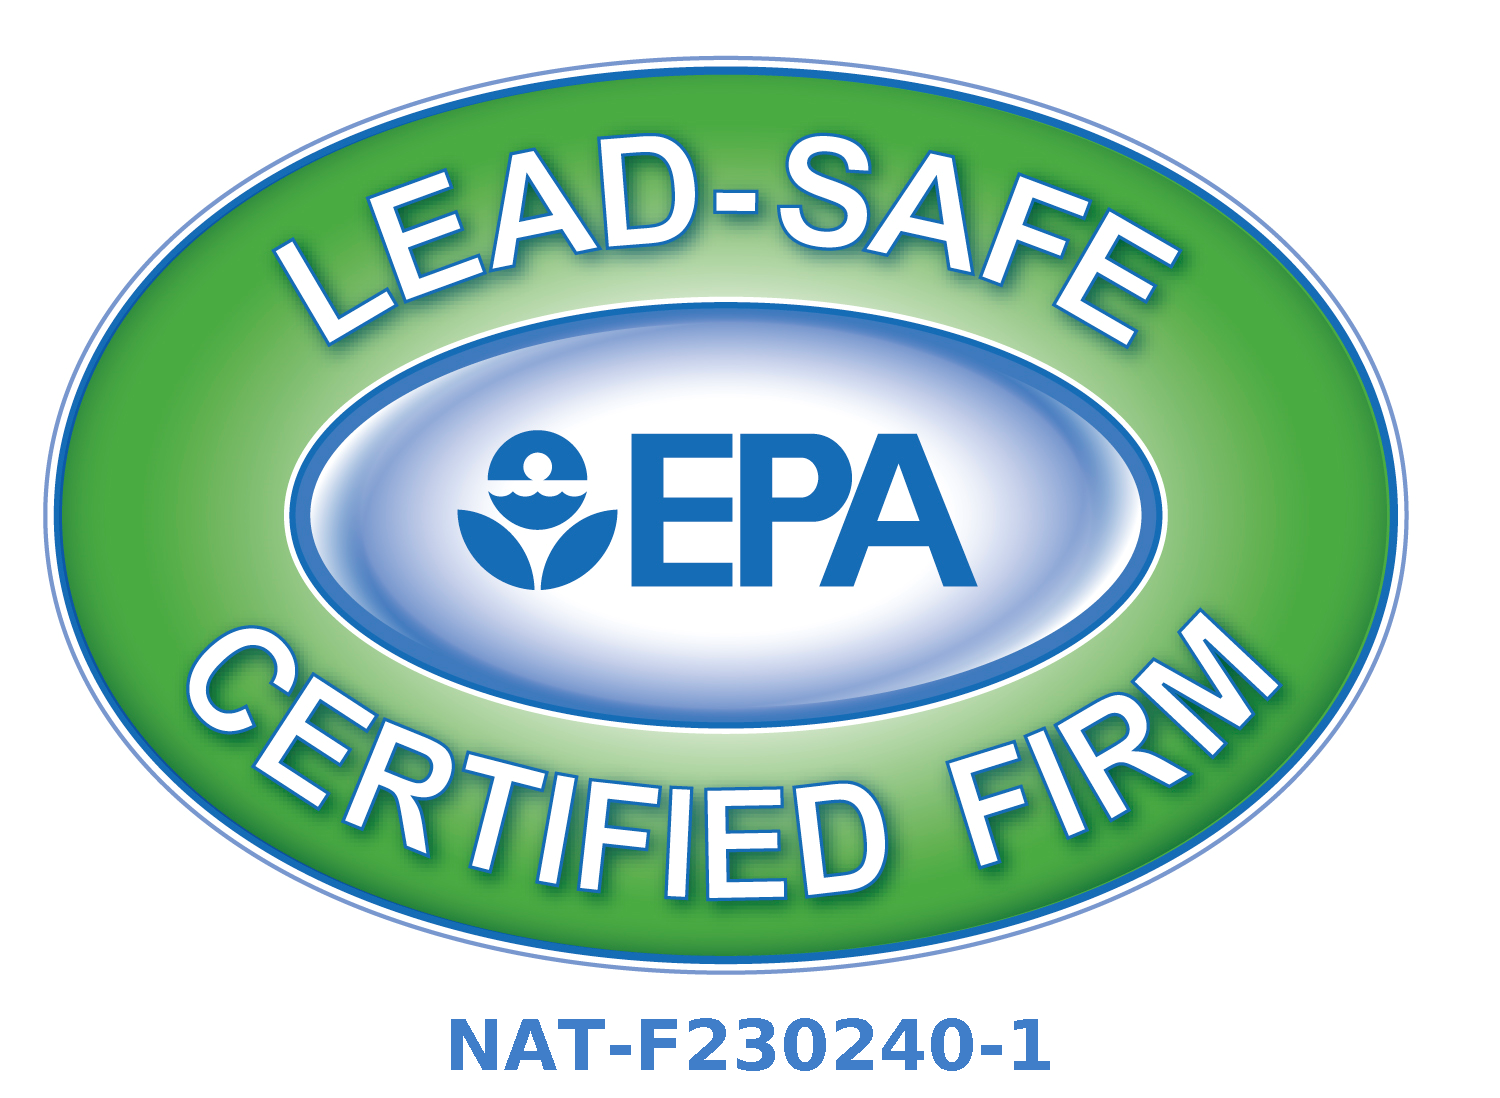 Lead-Safe EPA Certified Firm - CertaPro Painters